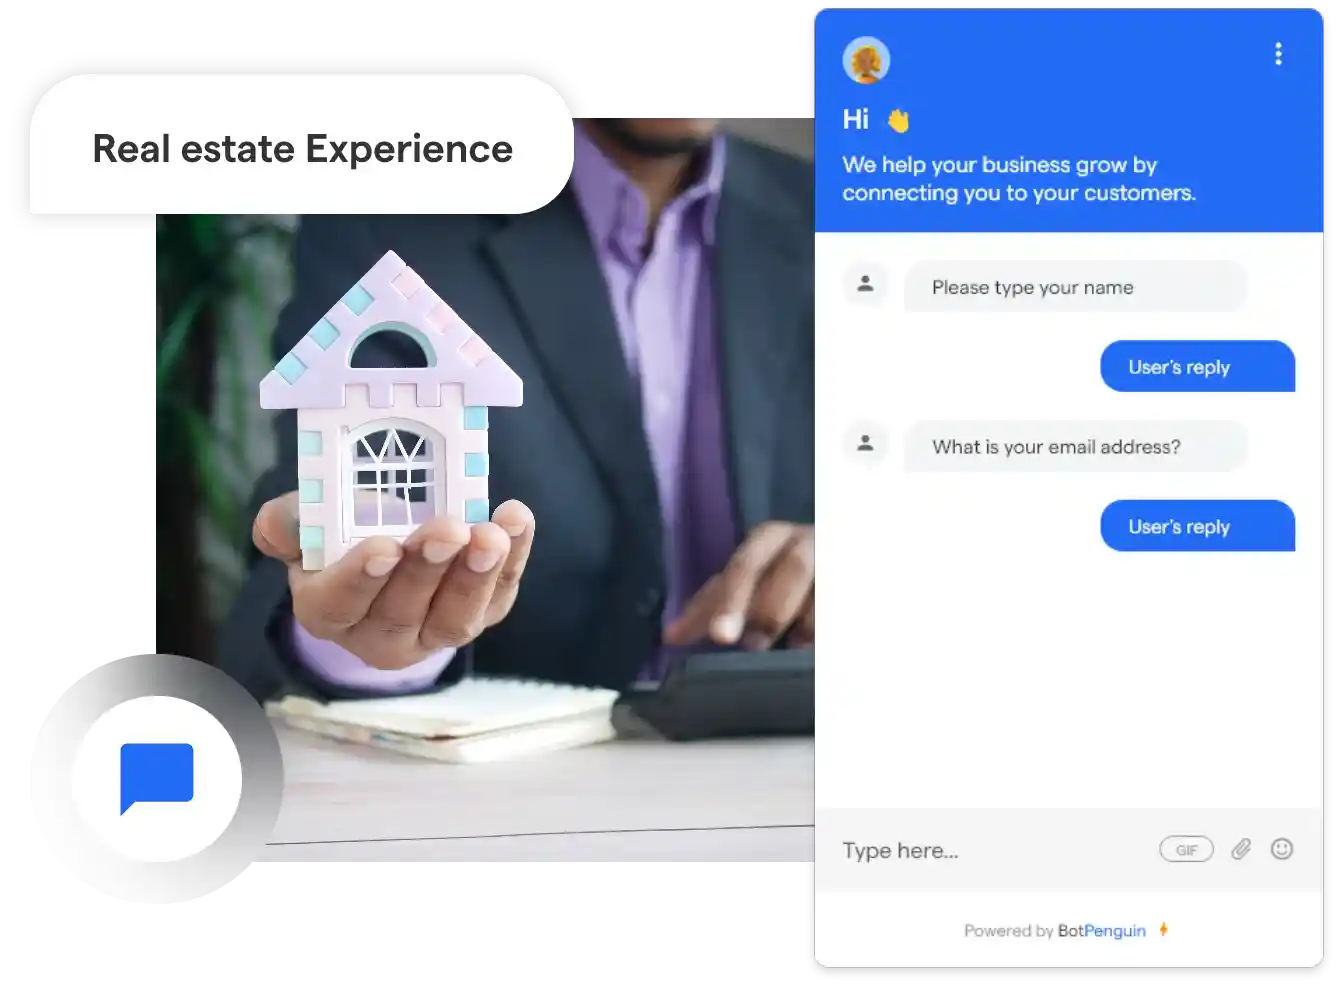 How to Choose the Right Chatbot for Your Real Estate Business